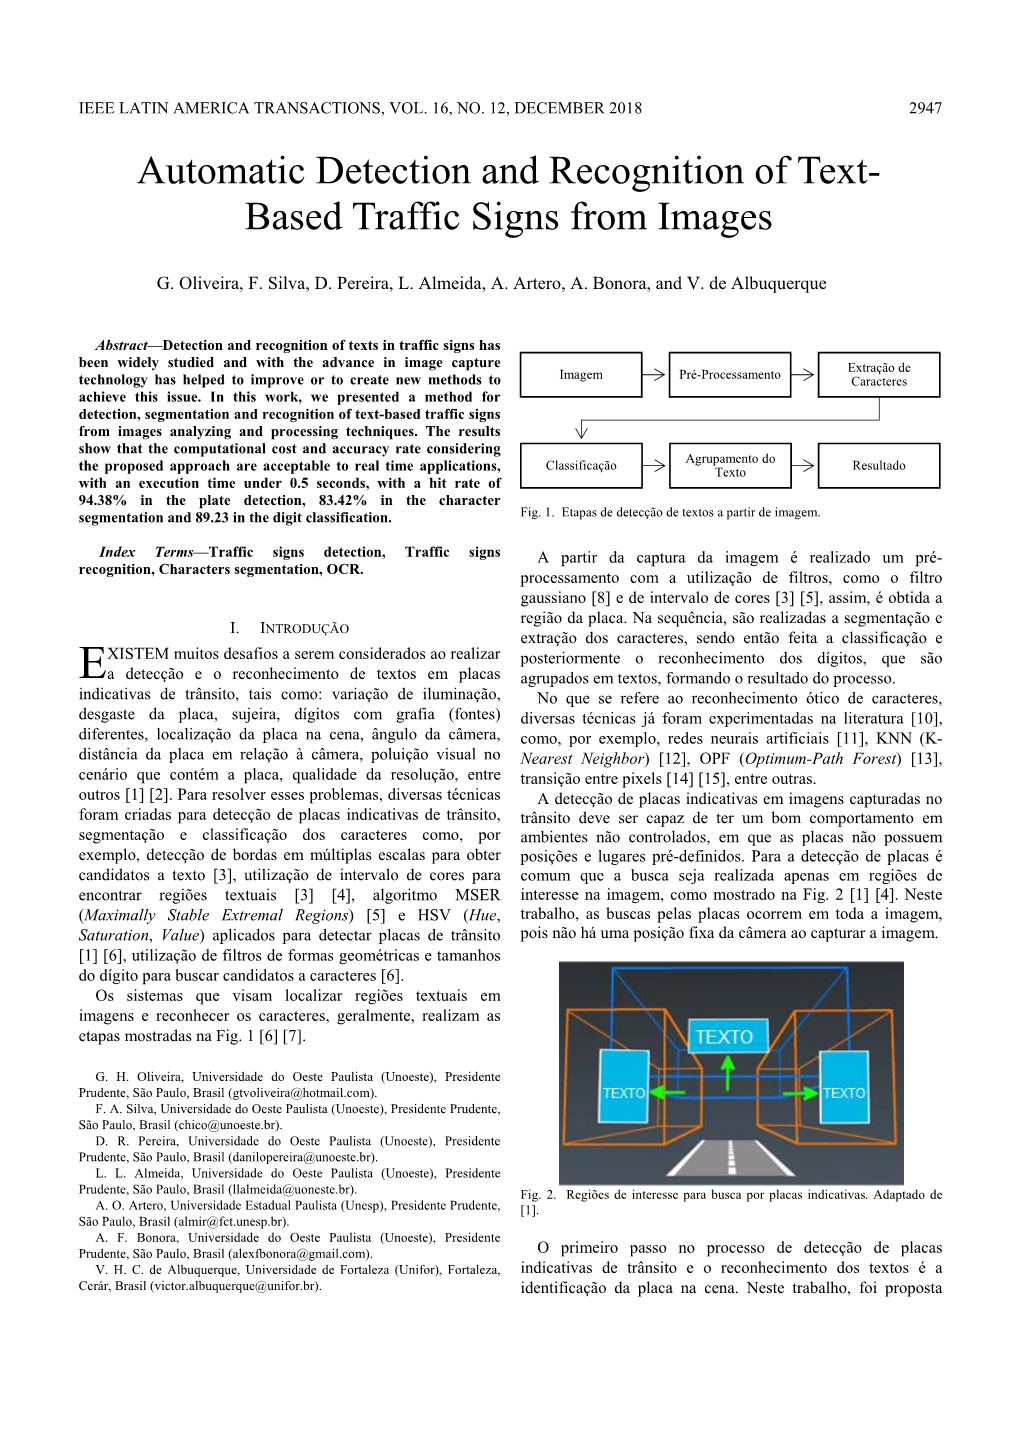 Automatic Detection and Recognition of Text- Based Traffic Signs from Images